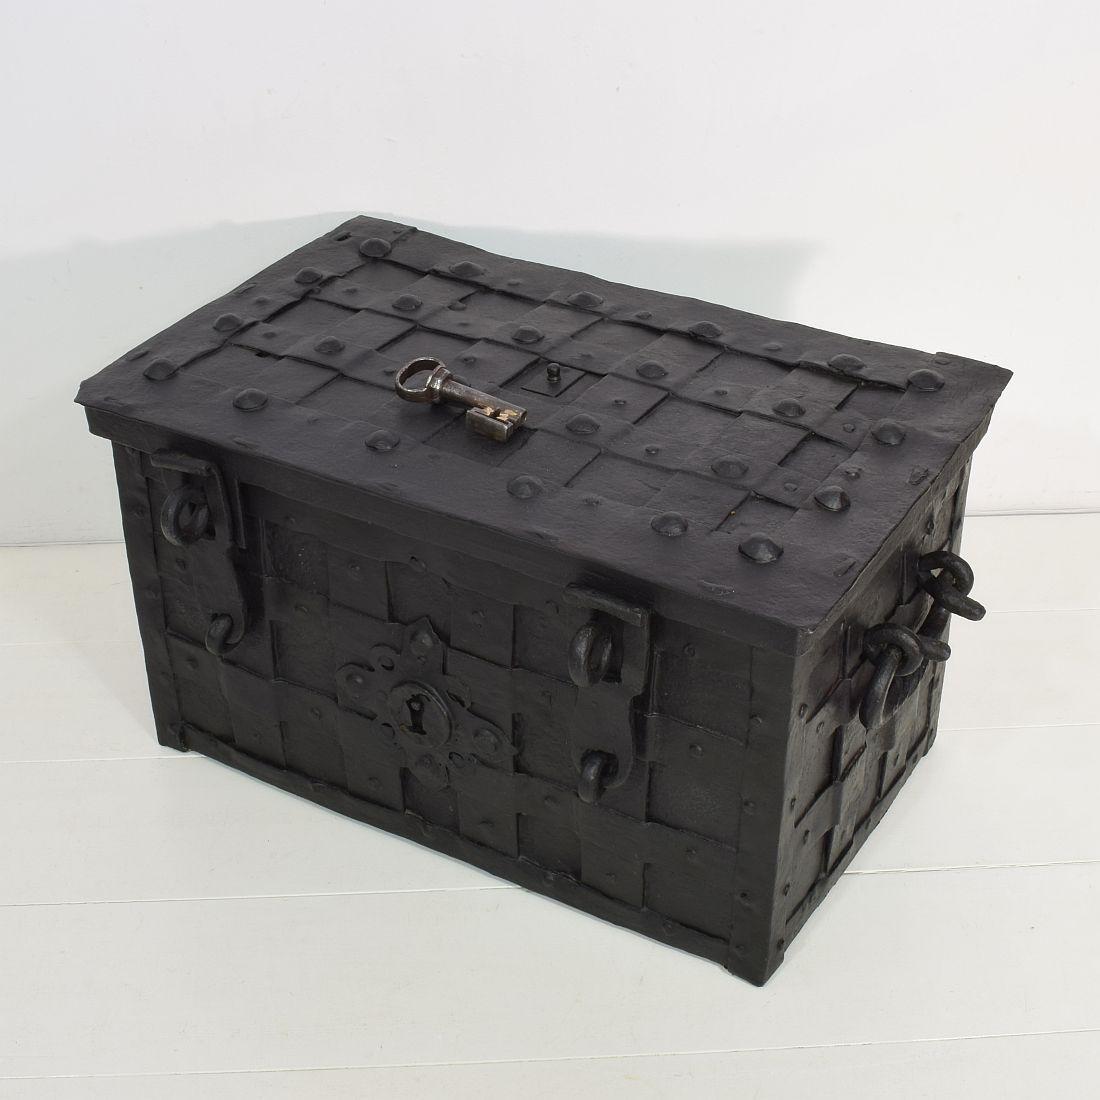 This beautiful handmade iron chest was made in Nuremberg or Augsburg in the 17th century 
They were made to hold valuables such as gold coins, jewels or maps. Starting in the 1800s, people started to refer to these chests as 